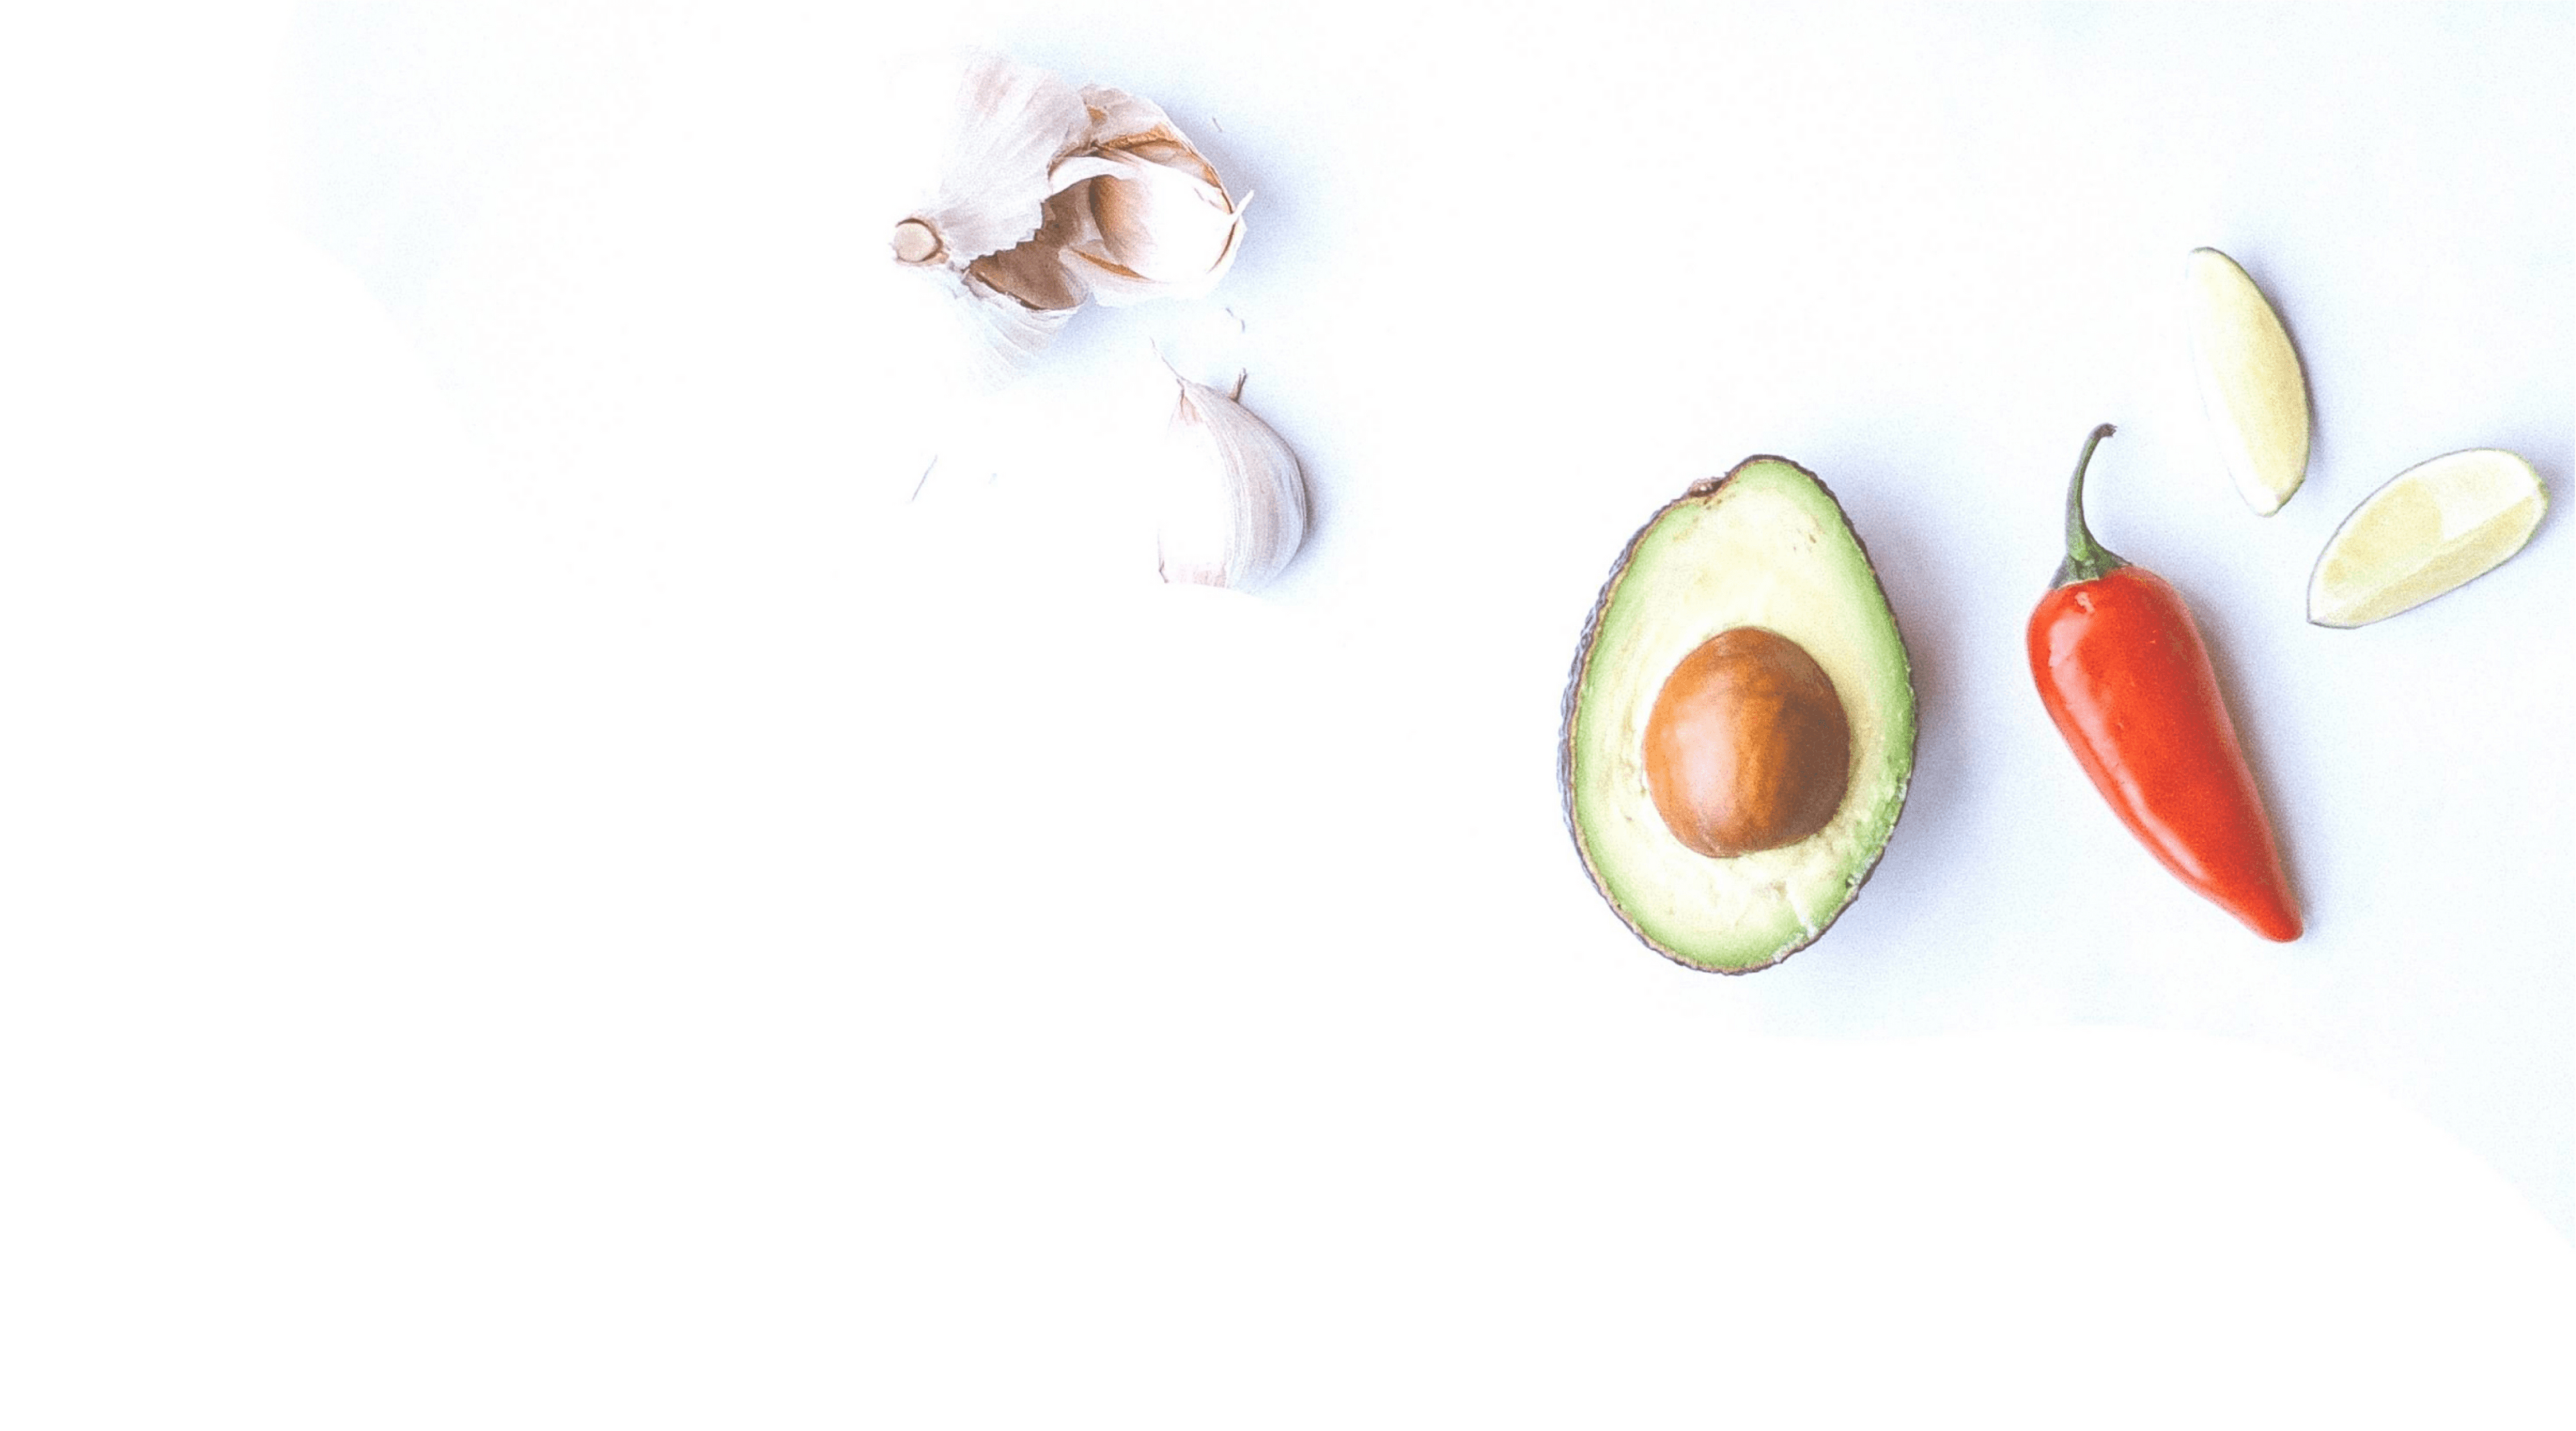 Avocado, garlic and pepper on white background